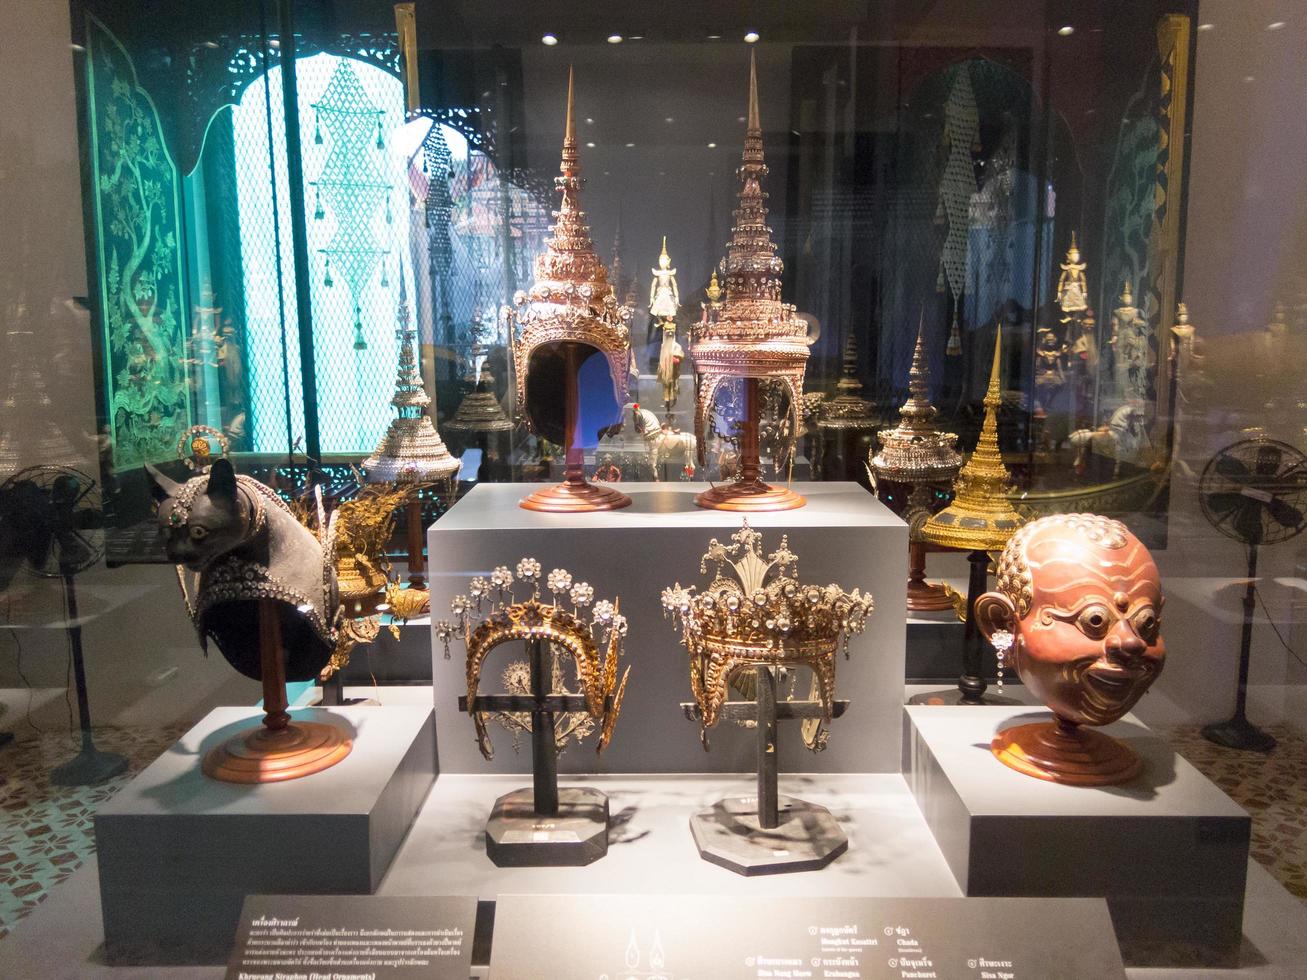 National Museum BANGKOKTHAILAND10 AUGUST 2018 Masks used to represent Ramayana and statues puppets and accessories in Thai dance performances. on 10 AUGUST 2018 in Thailand. photo